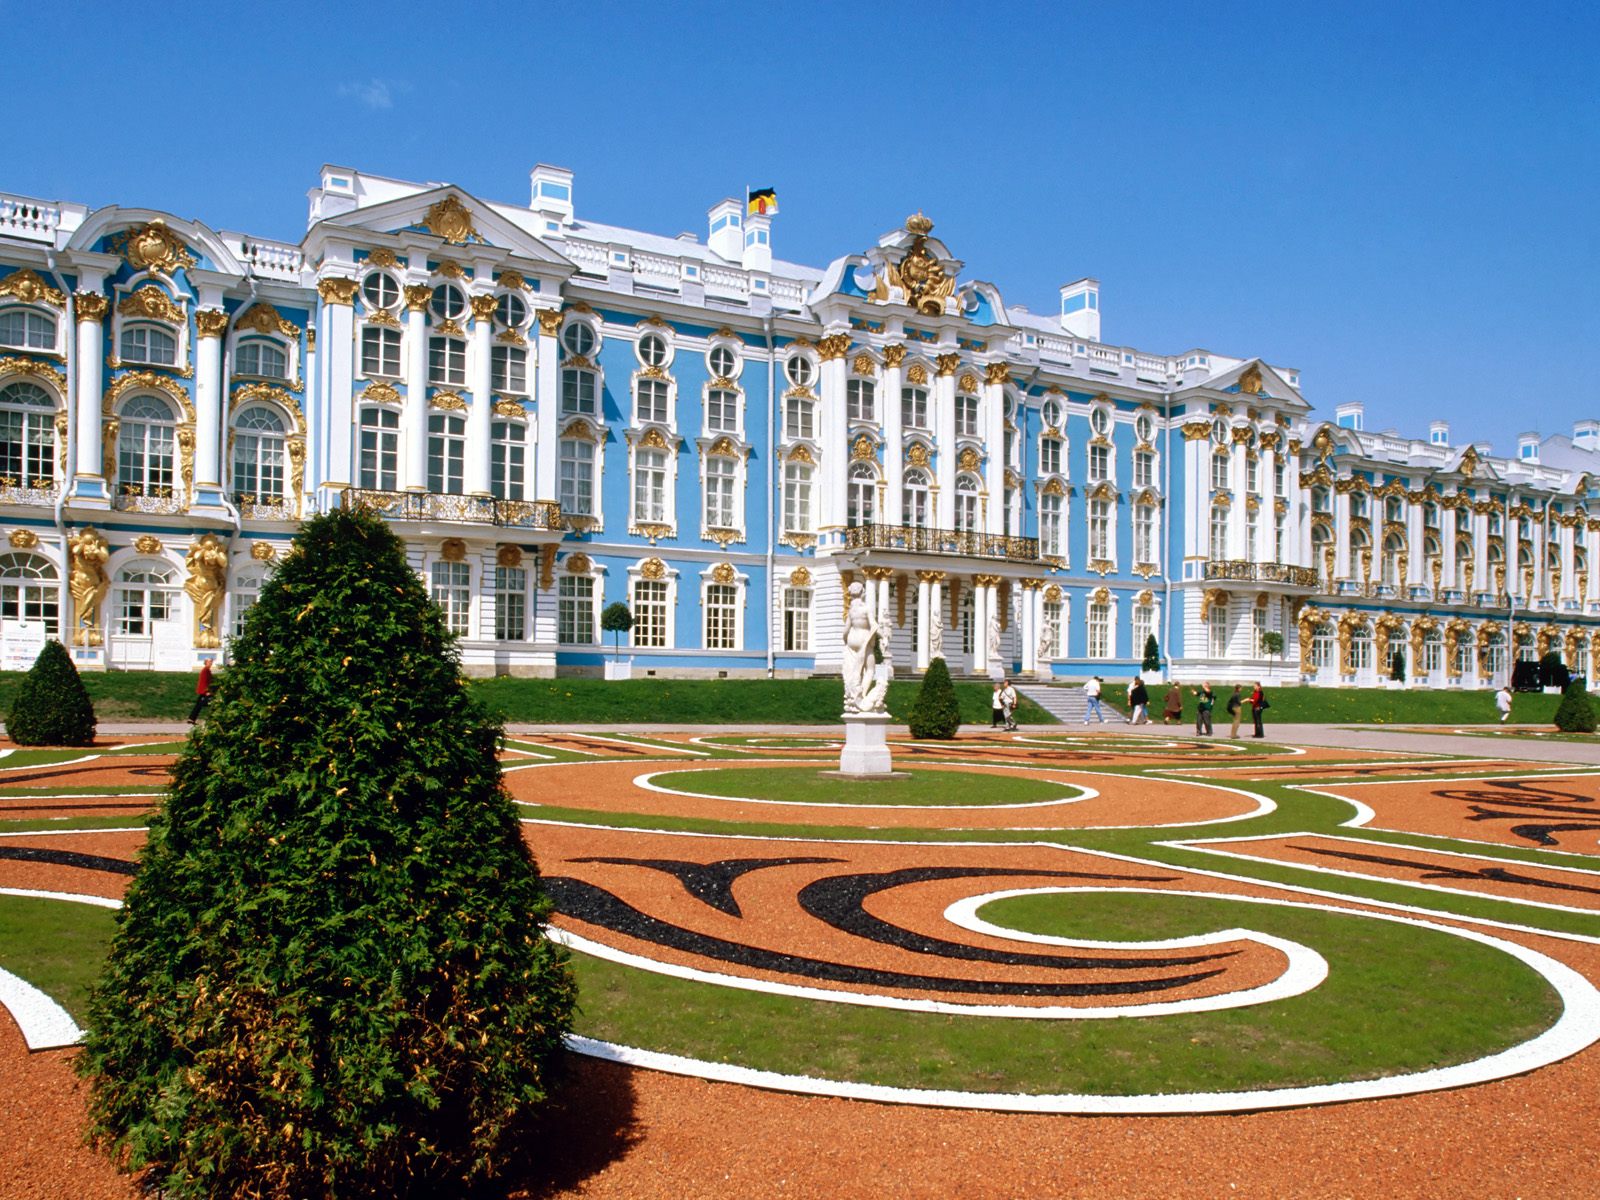  Russia photo Catherine Palace St Petersburg Russia wallpaper